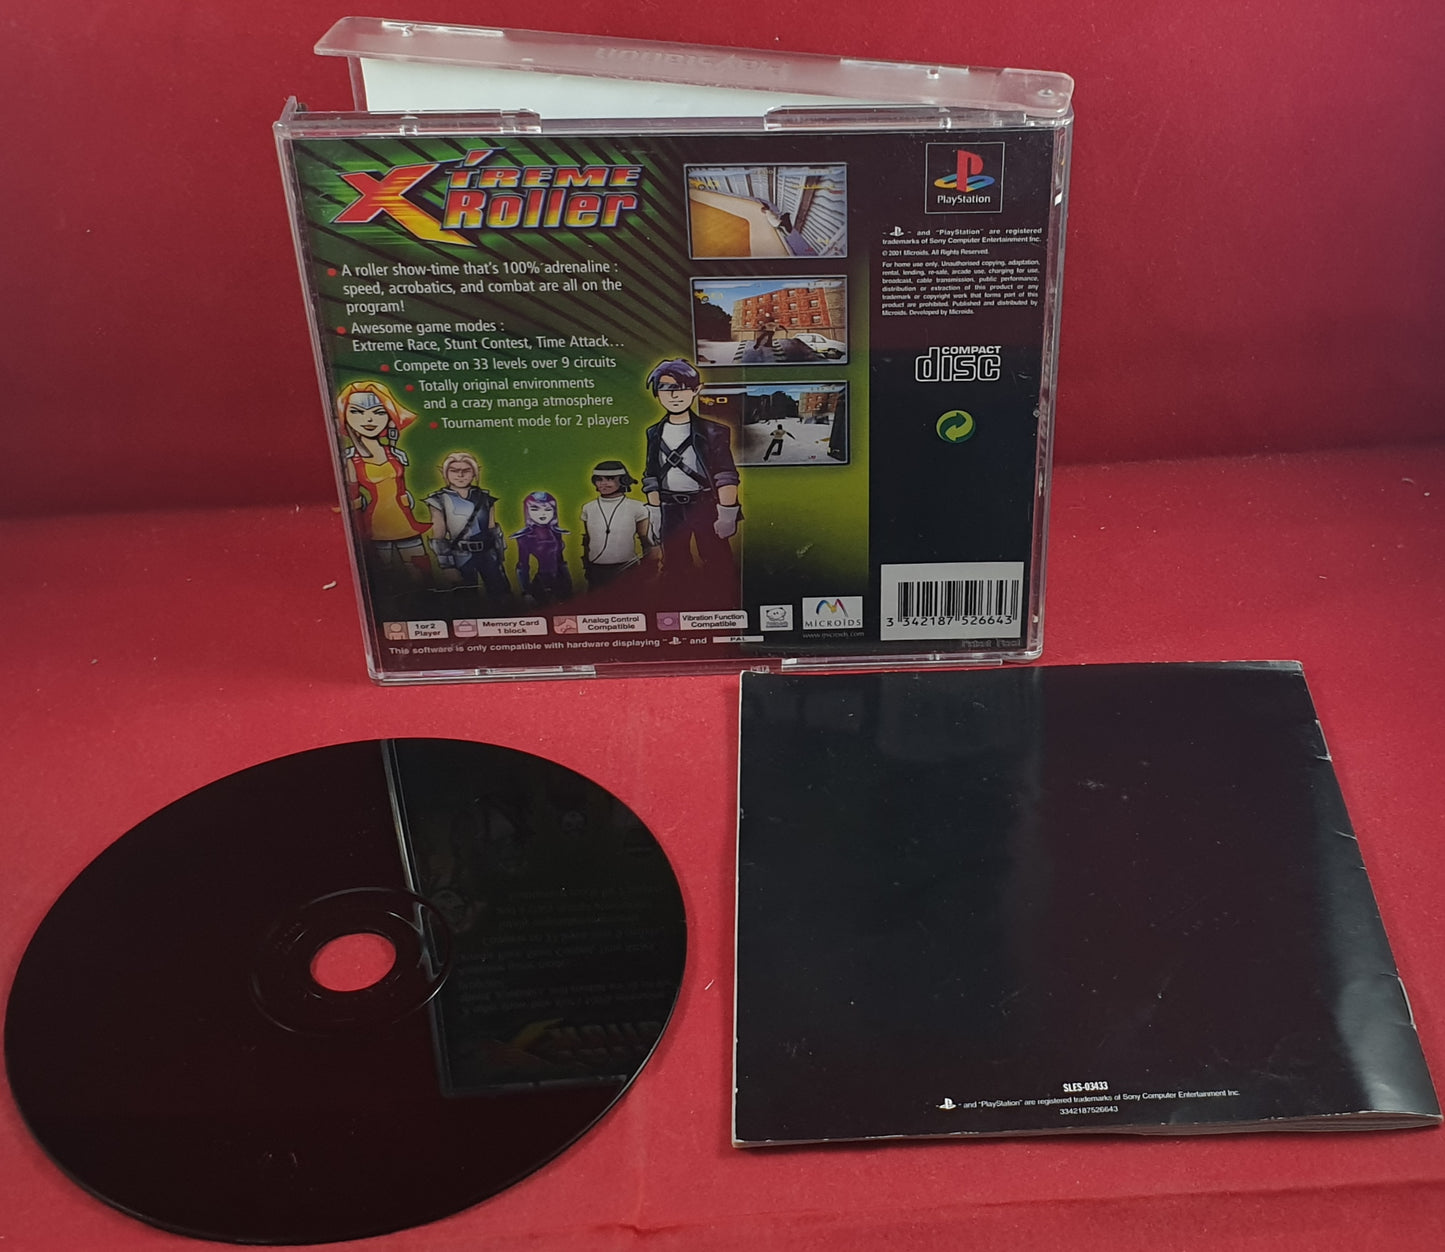 X'treme Roller Sony Playstation 1 (PS1) Game